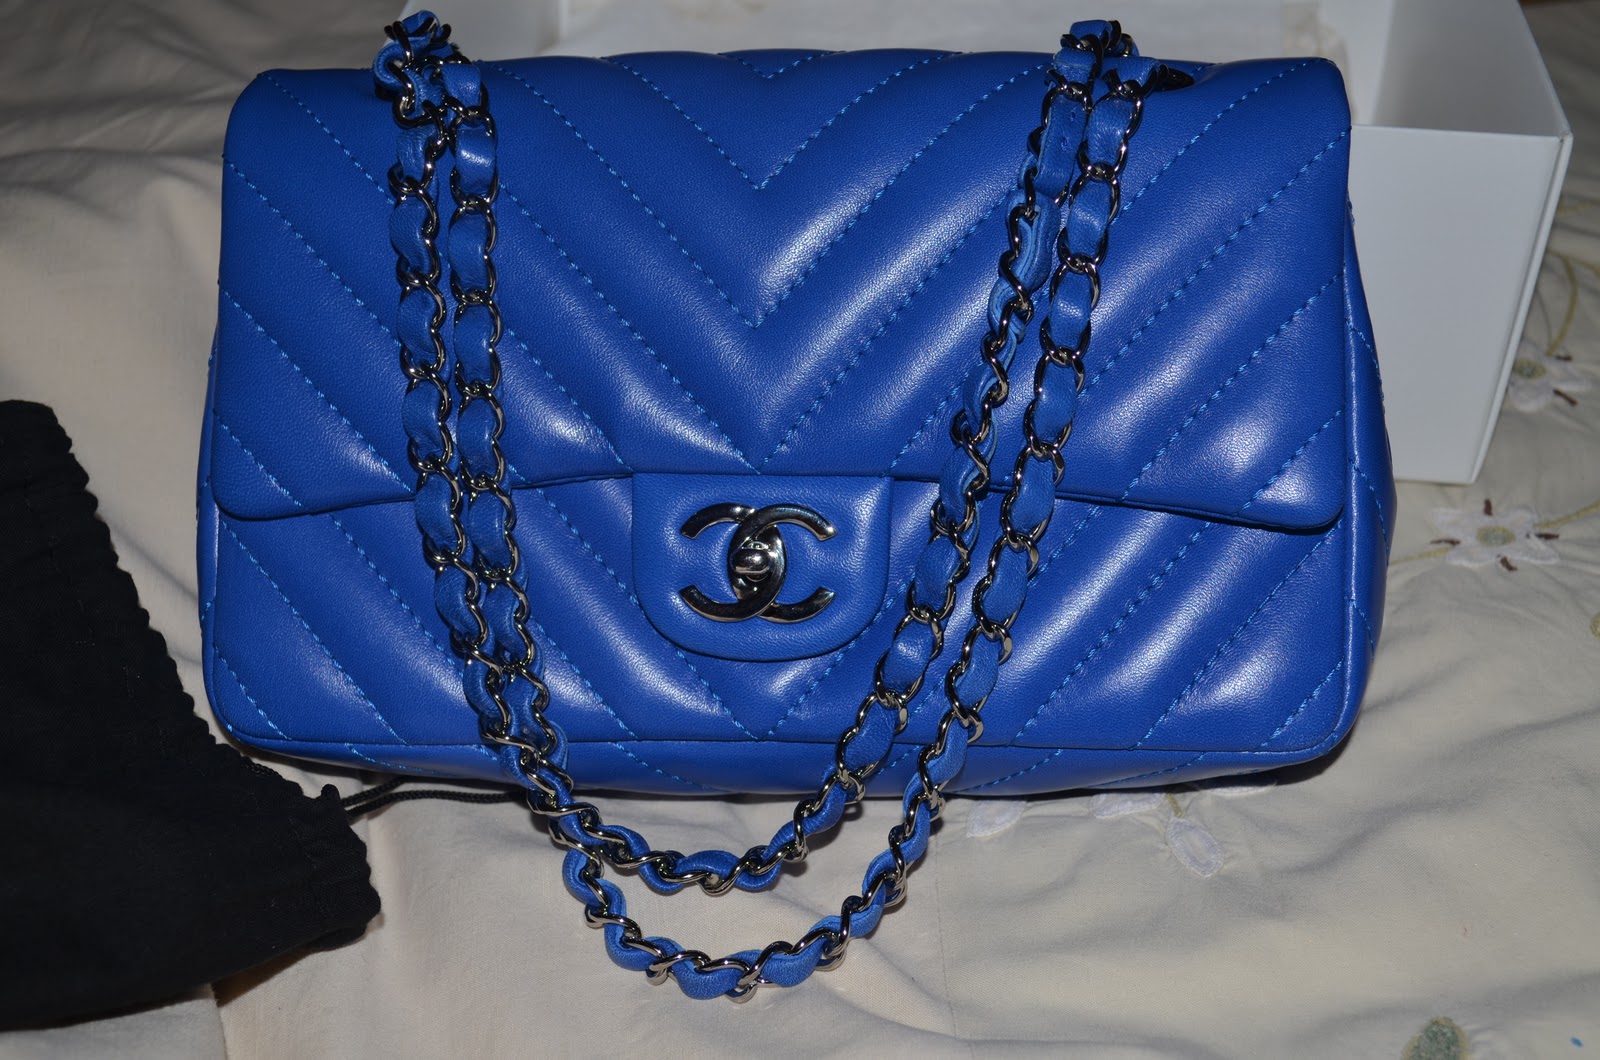 Prada Bags: Chanel Bags For Sale